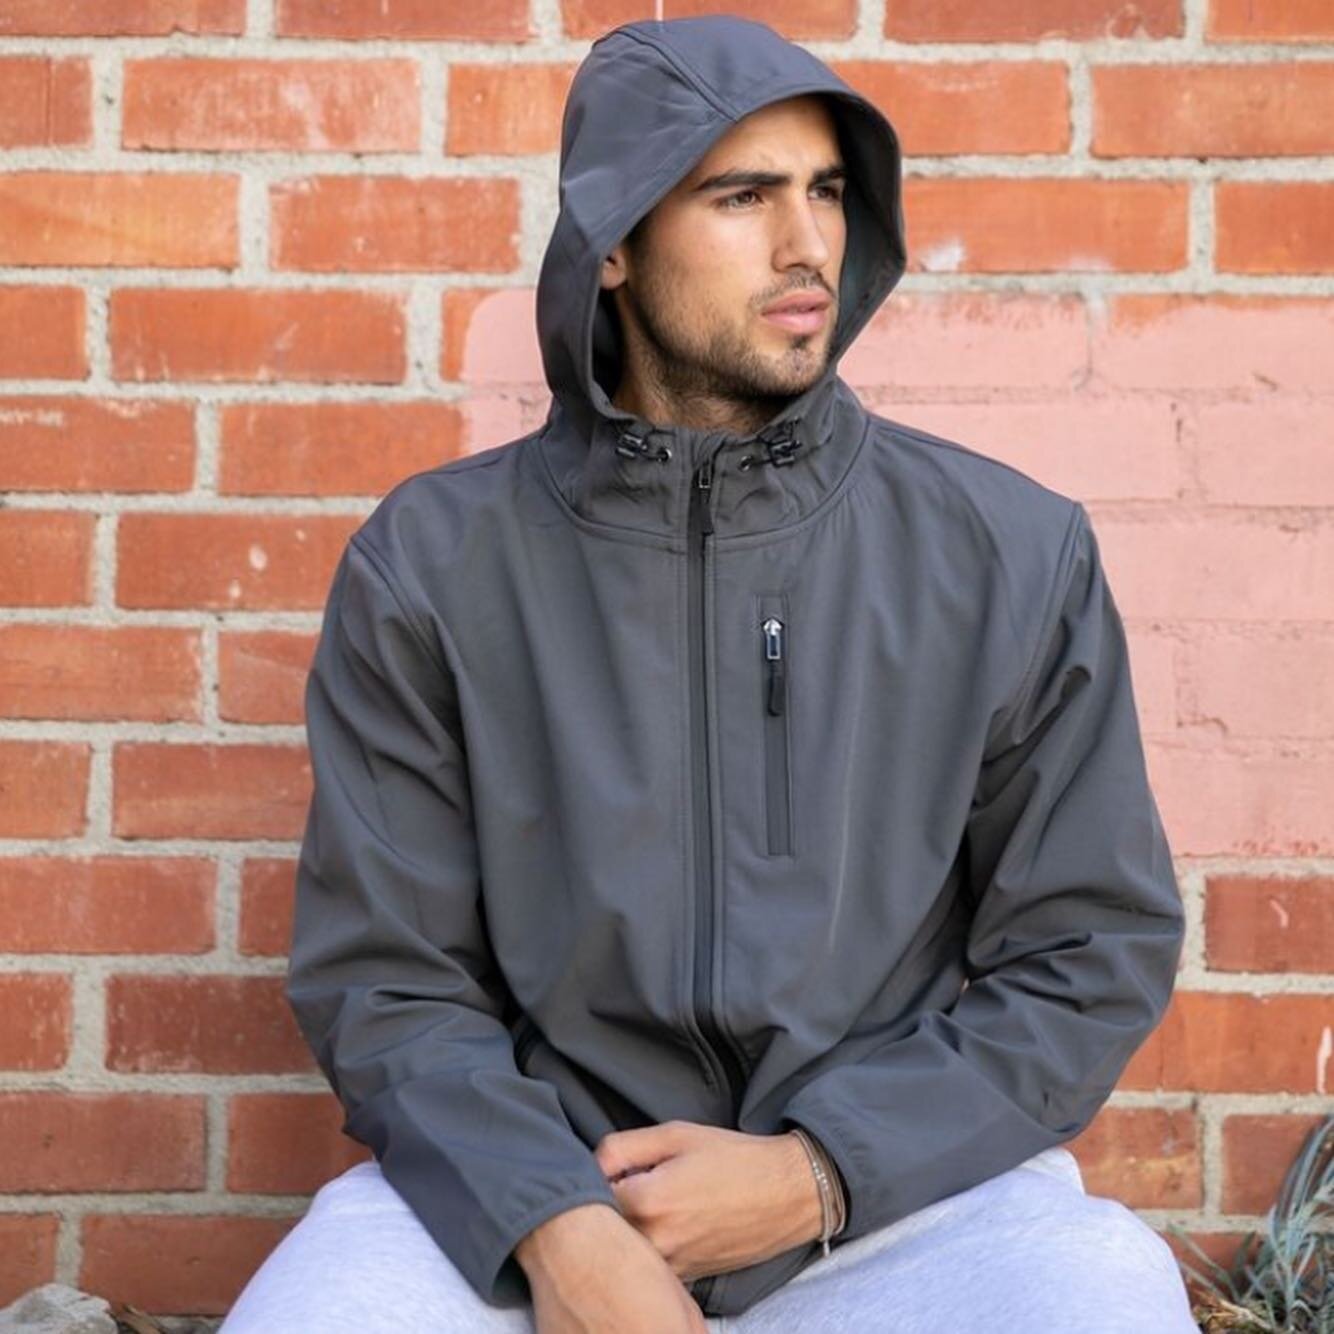 Water resistant shell jacket and fleece pants for those unexpected/expected light rain and chilly summer Vancouver nights